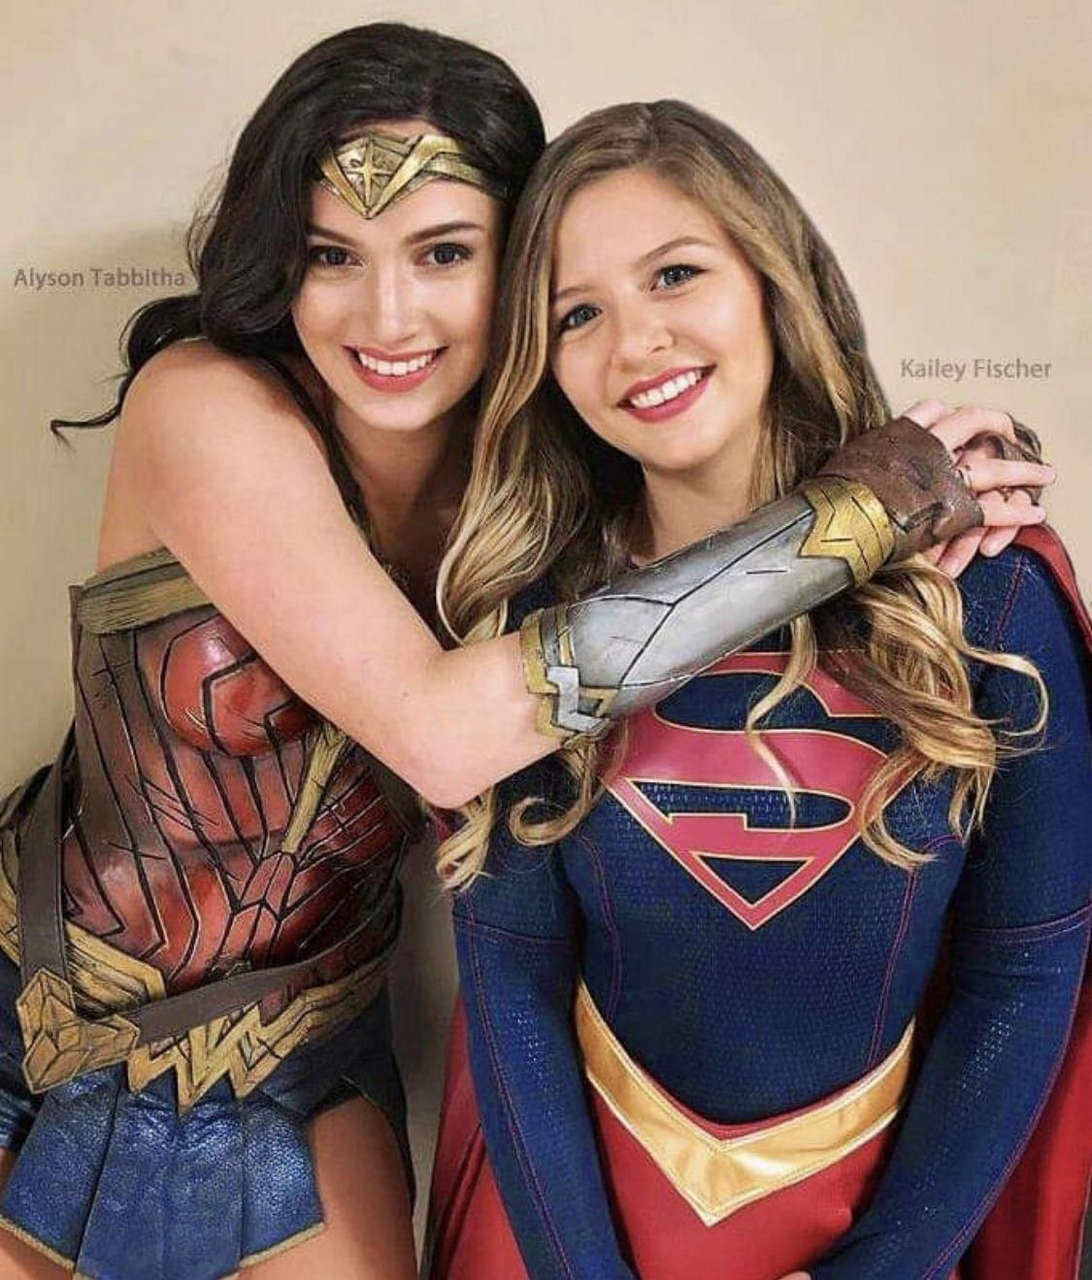 Wonder Woman And Supergirl By Alyson Tabbitha And Kailey Fische